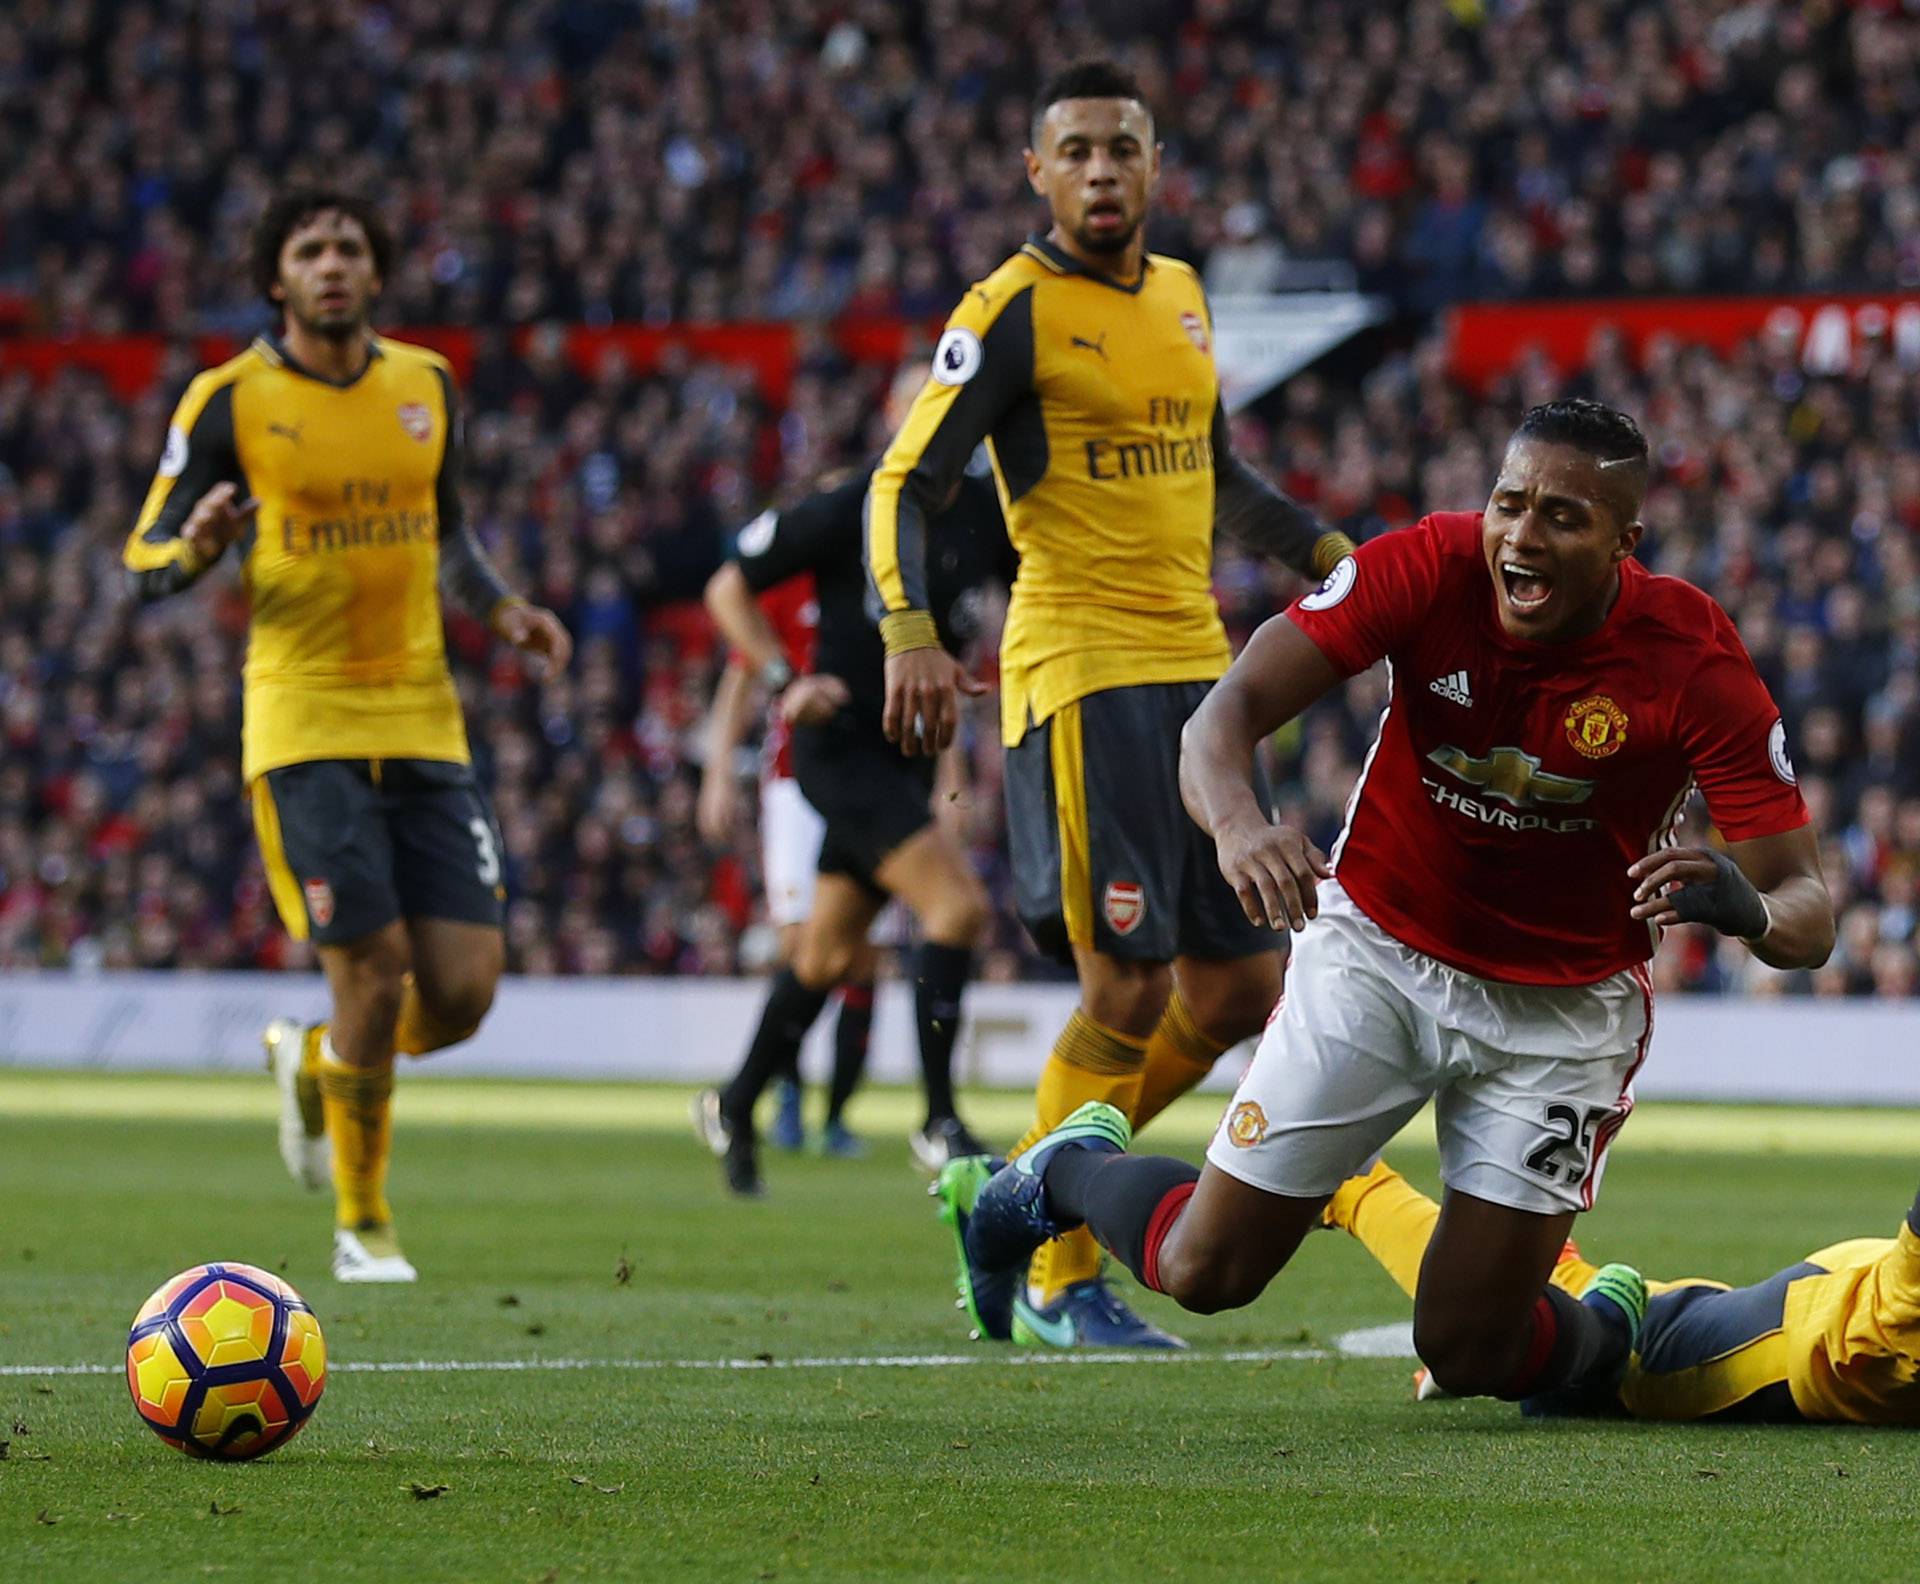 Manchester United's Antonio Valencia goes down in the area after a challenge by Arsenal's Nacho Monreal however a penalty is not awarded